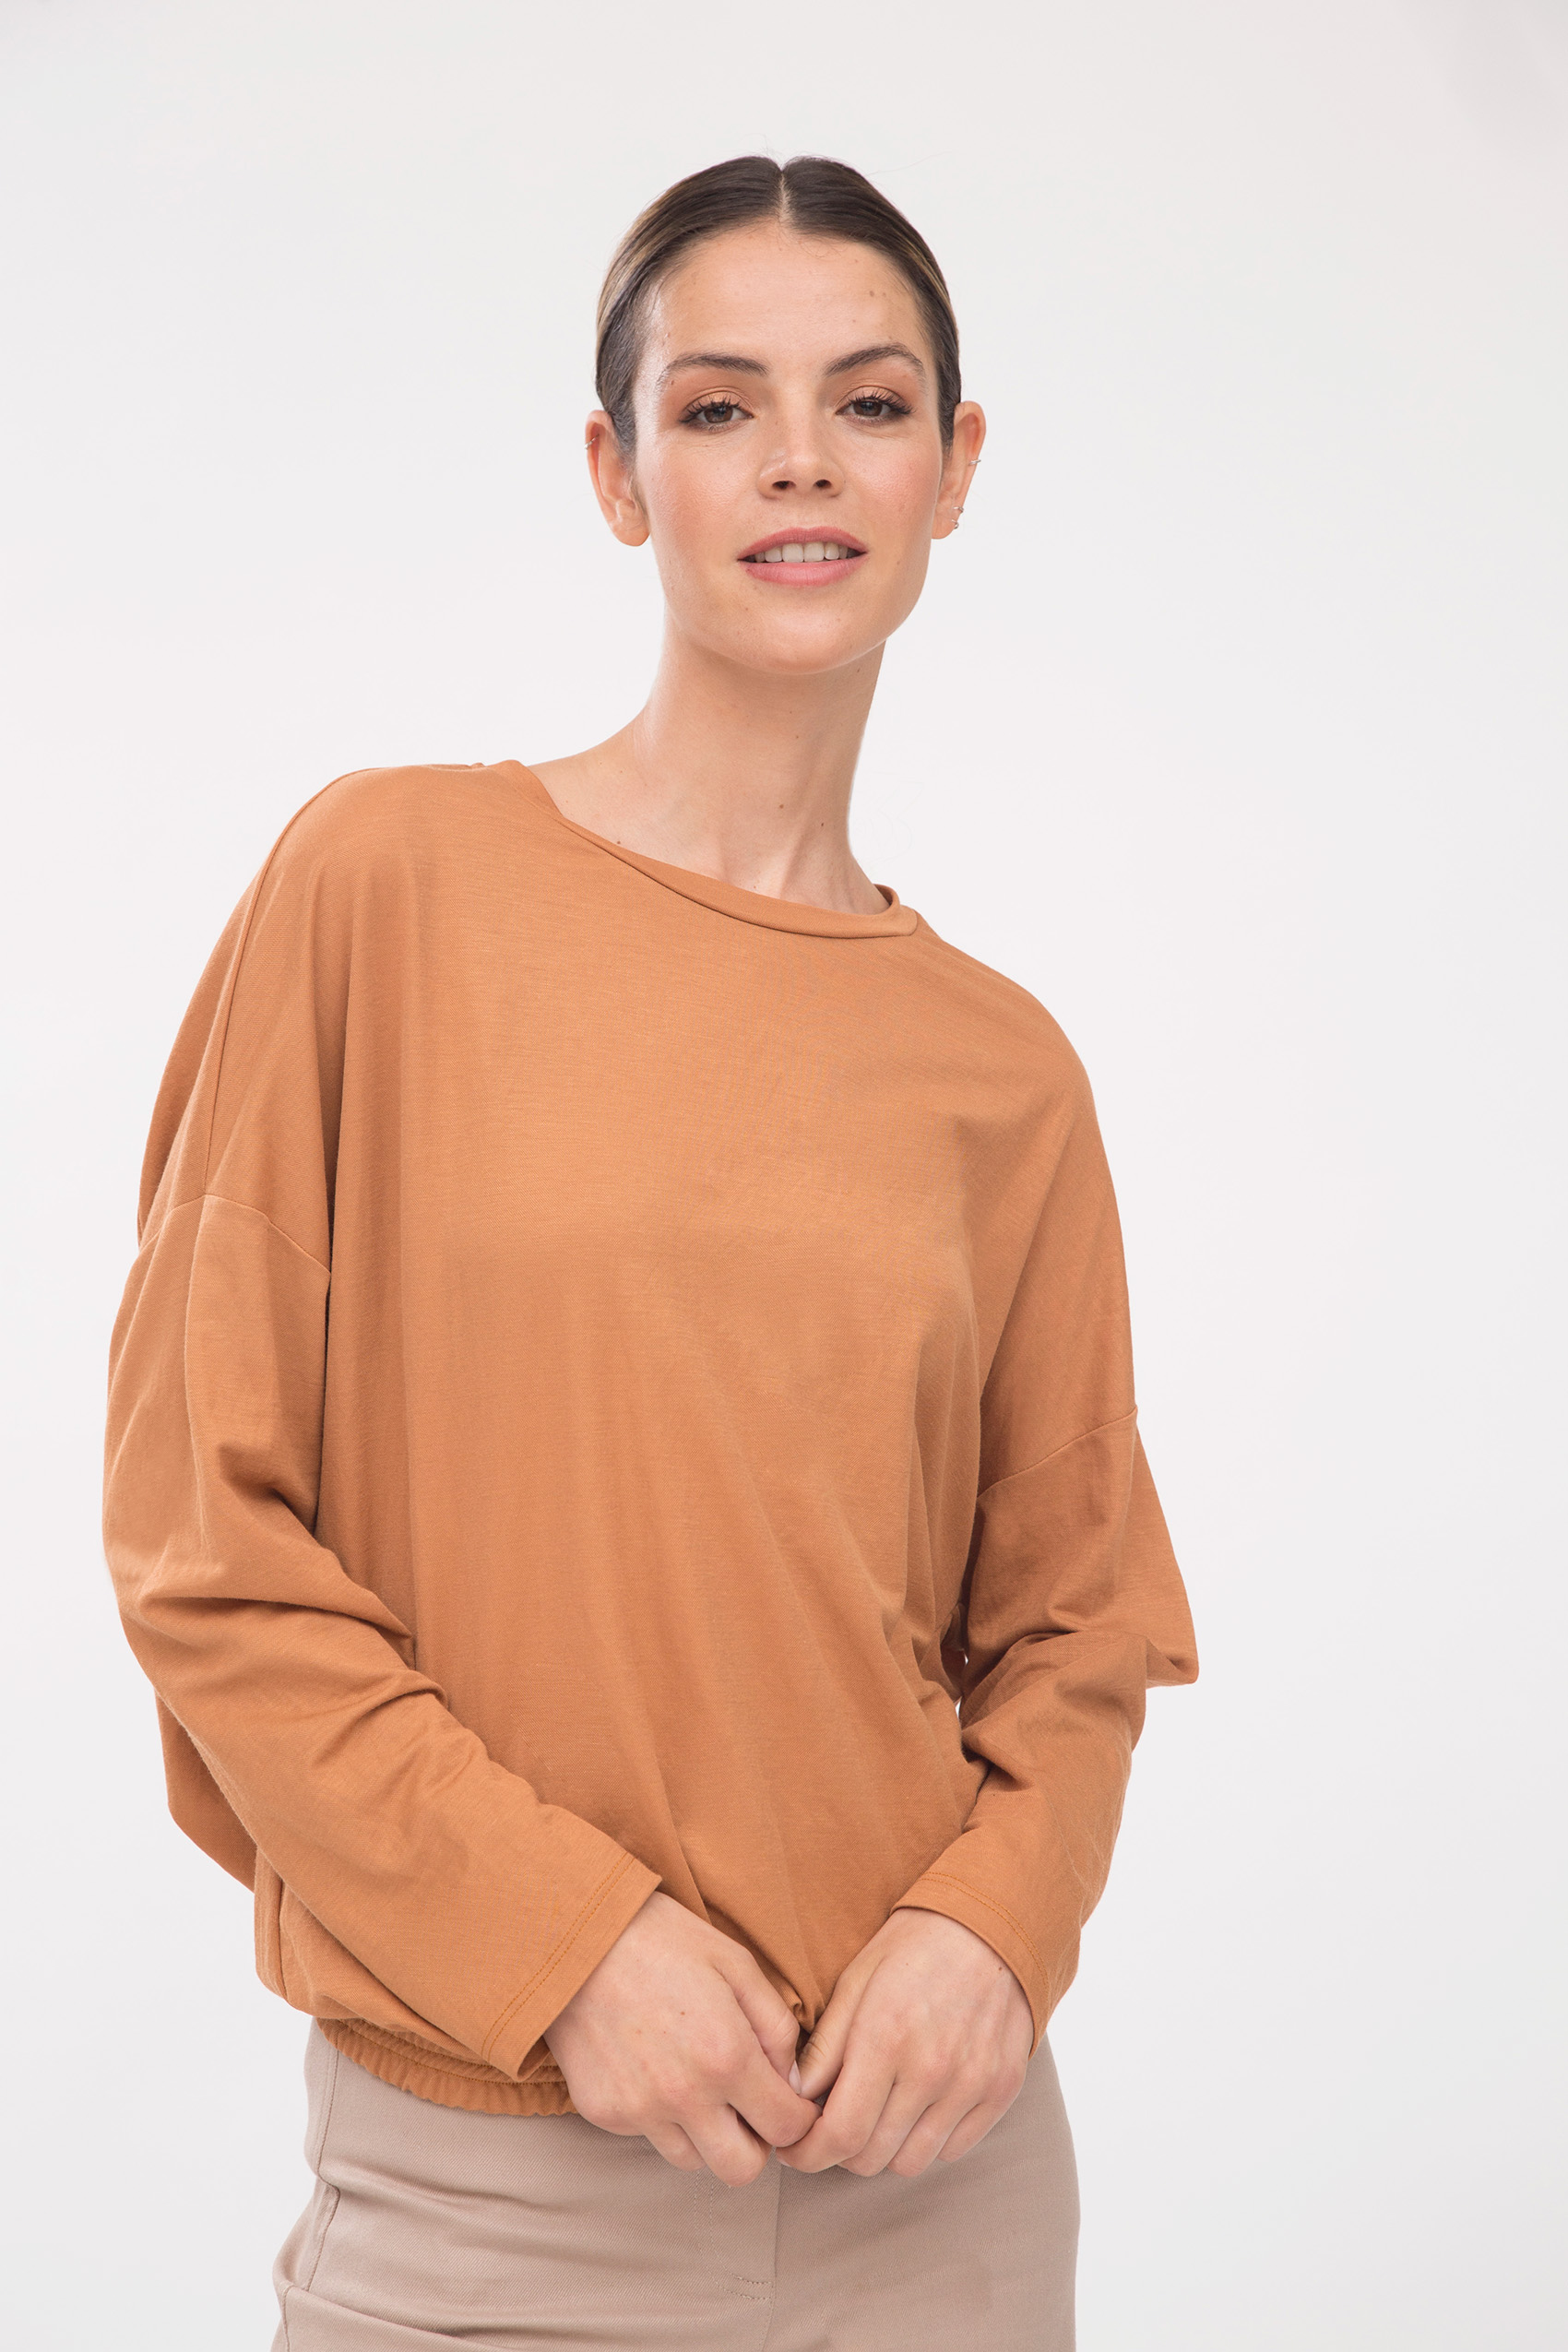 awada_remera-debby_13-29-2022__picture-30433